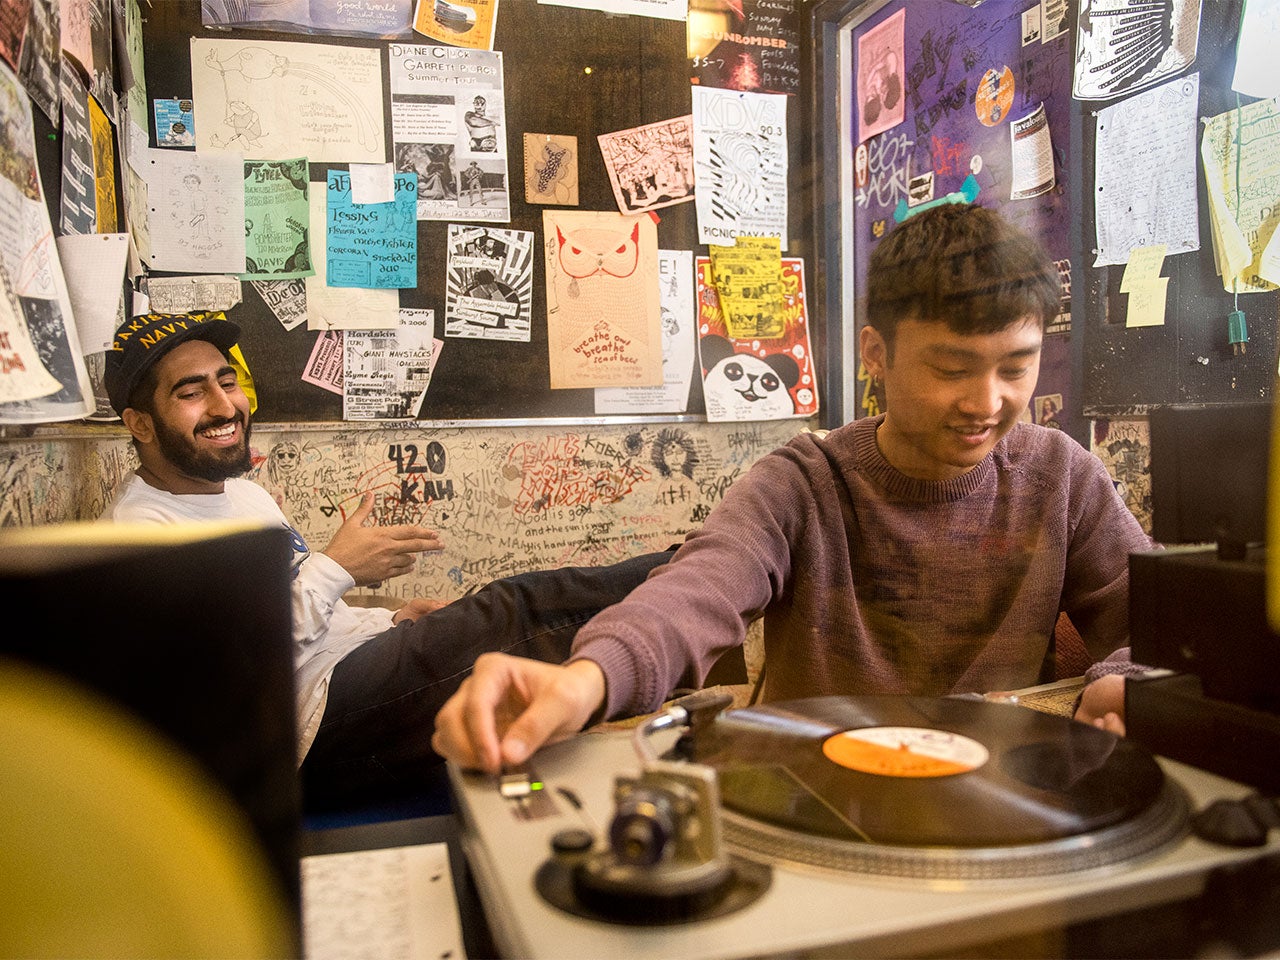 A UC Davis student works a record player in a radio studio while another student sits in front of the poster-filled back wall, smiling.